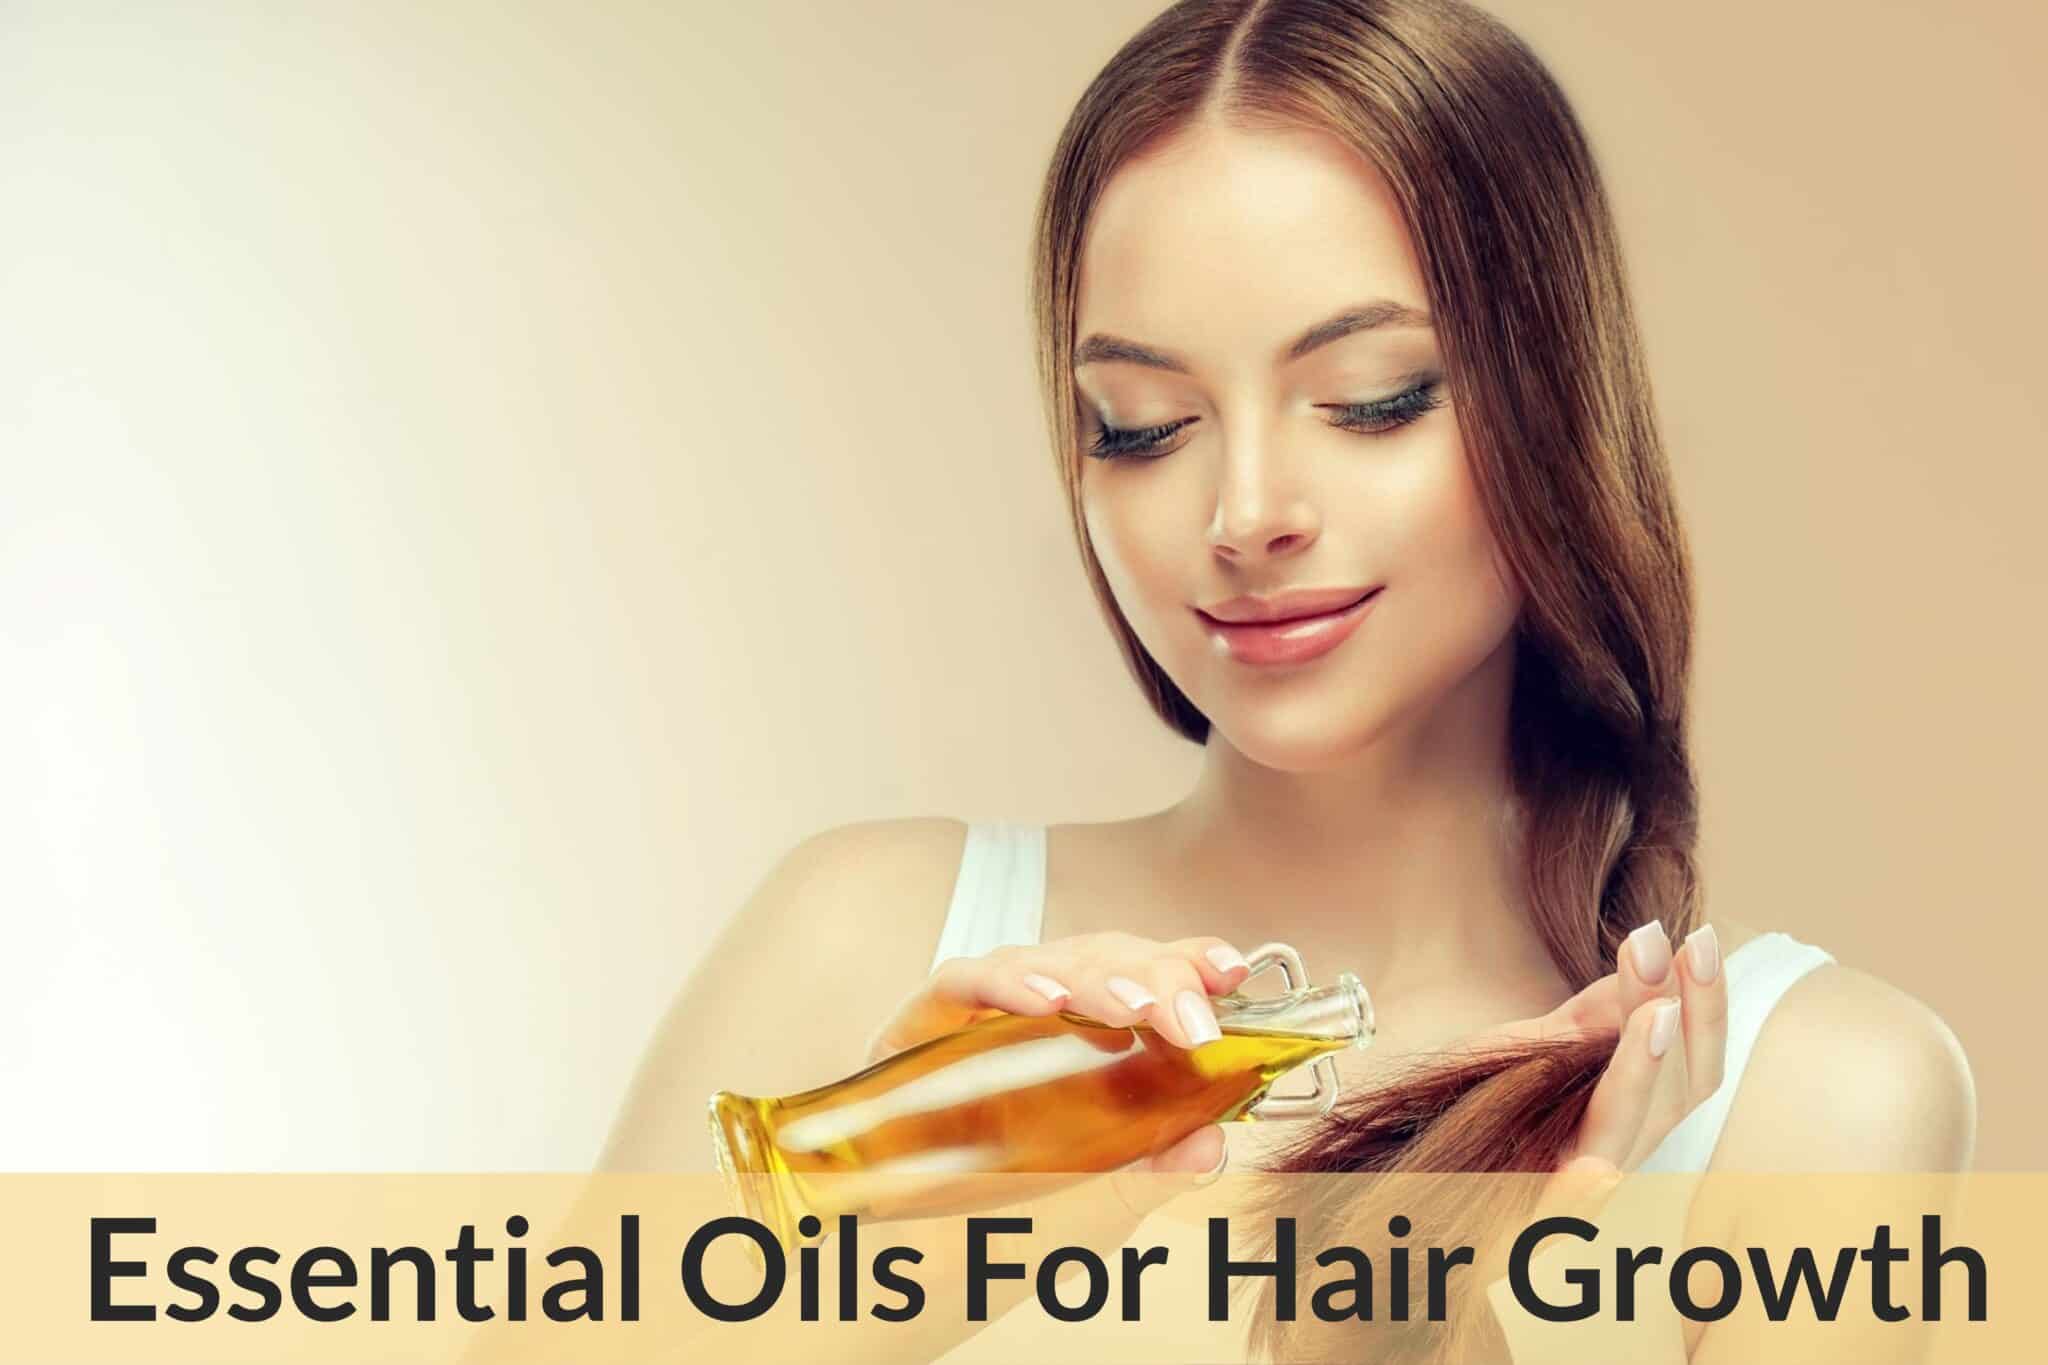 Essential Oils For Hair Growth Reach For Essential Oils When Your Hair Seem To Have Lost The 1964